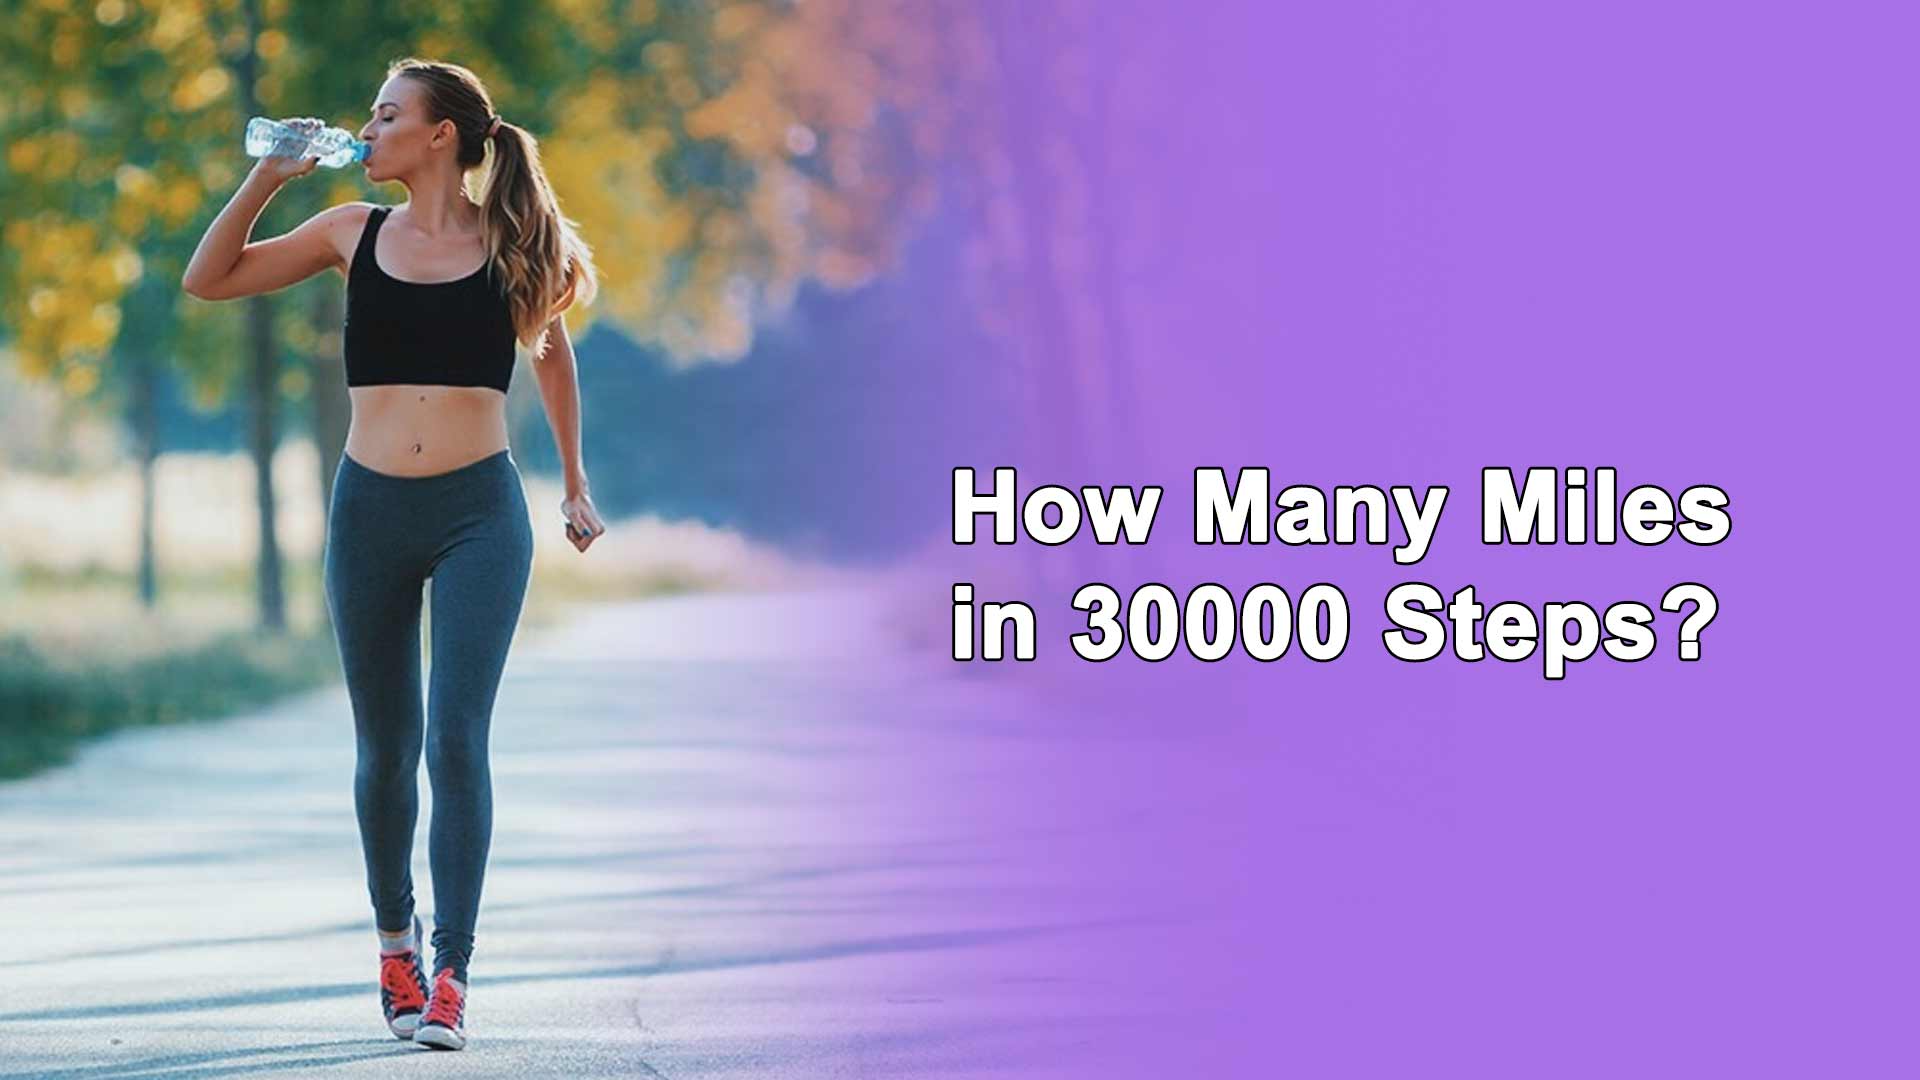 How Many Miles in 30000 Steps